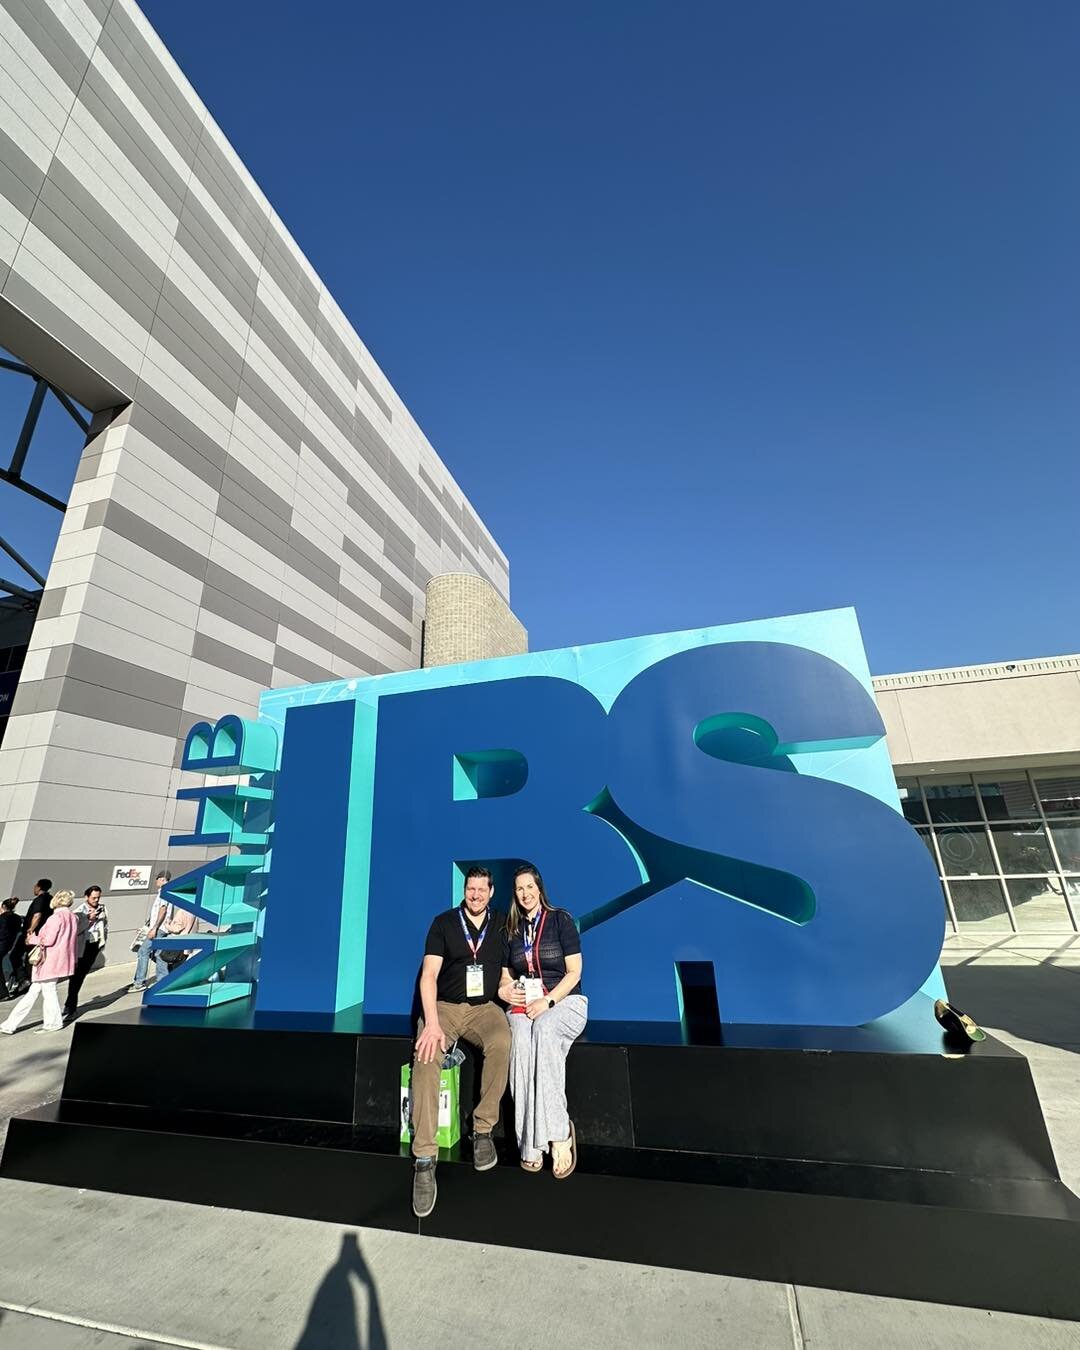 A few weeks ago I attended the IBS (International Builders Show) in Las Vegas to learn more about the hearth and building markets for my marketing clients. It was a honor to have my husband travel with me and we enjoyed the amazing show, but man did 